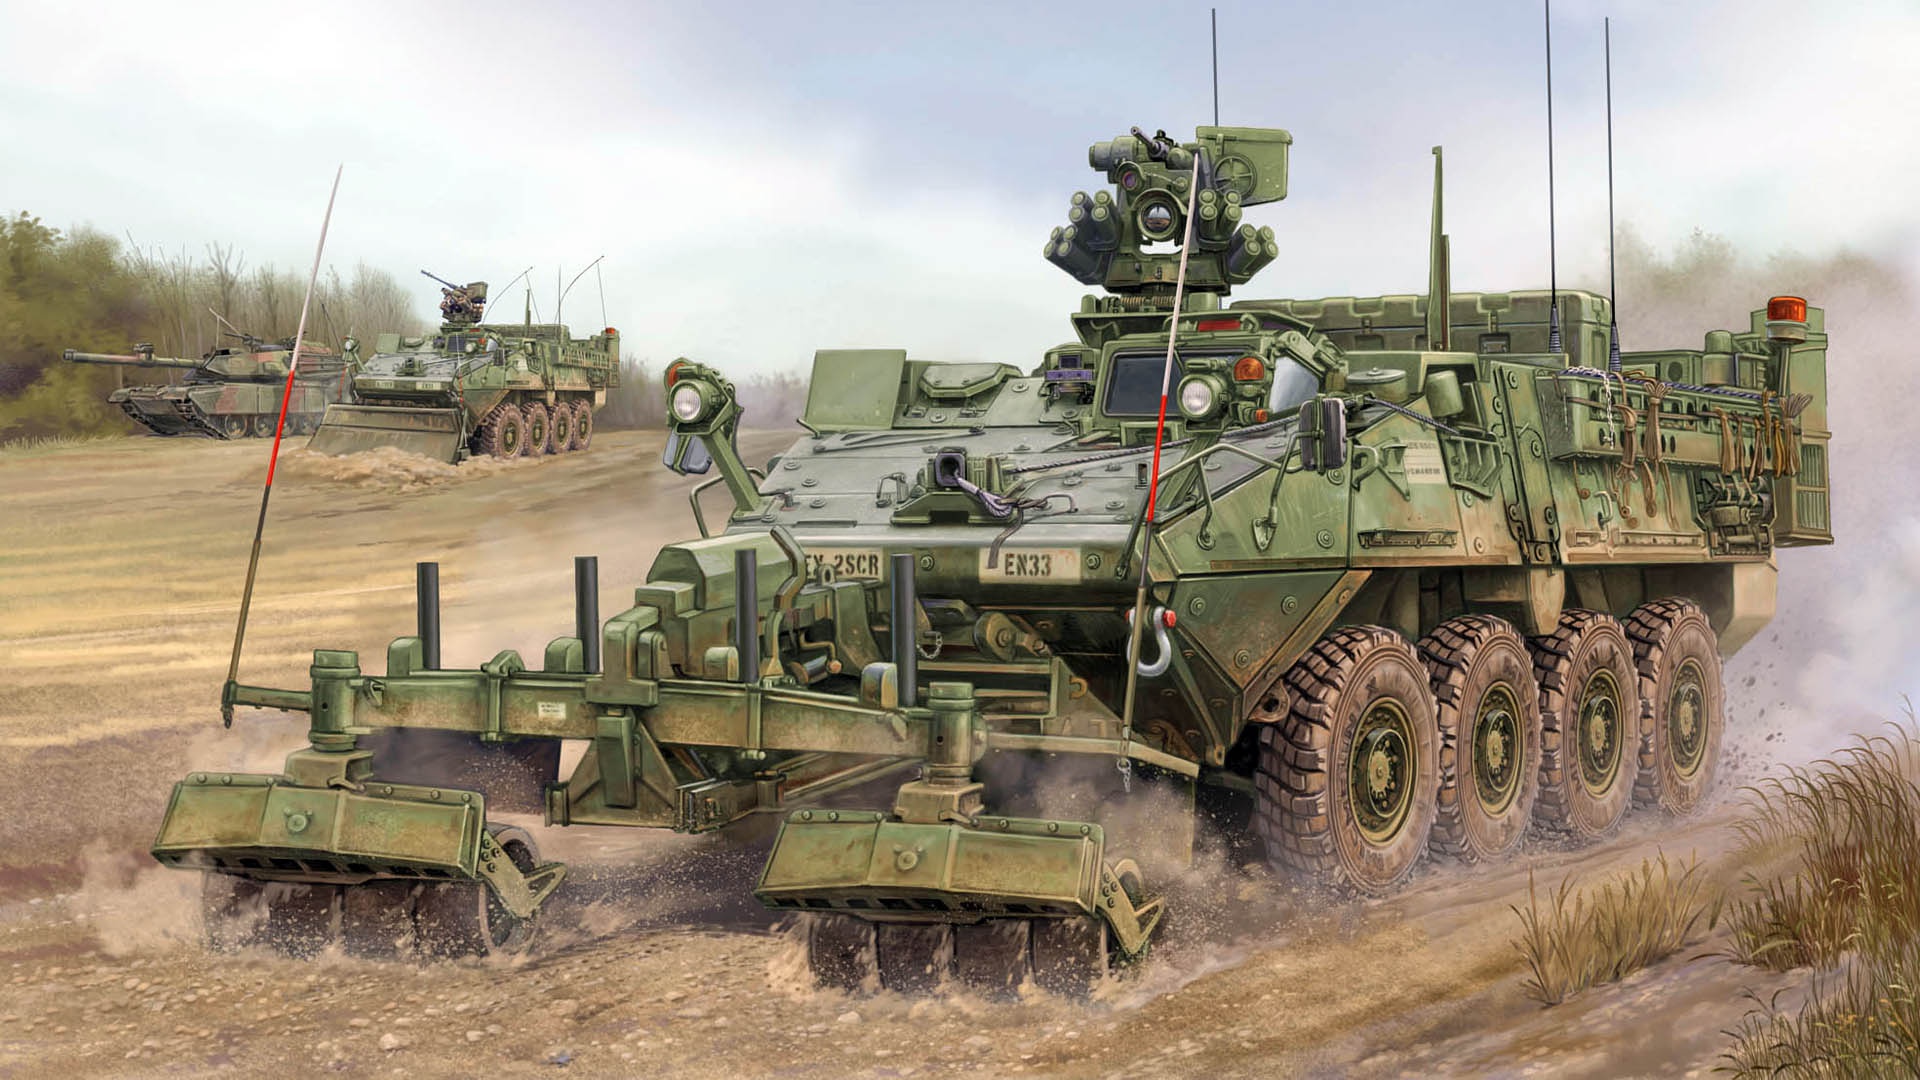 General 1920x1080 artwork vehicle military military vehicle frontal view ground